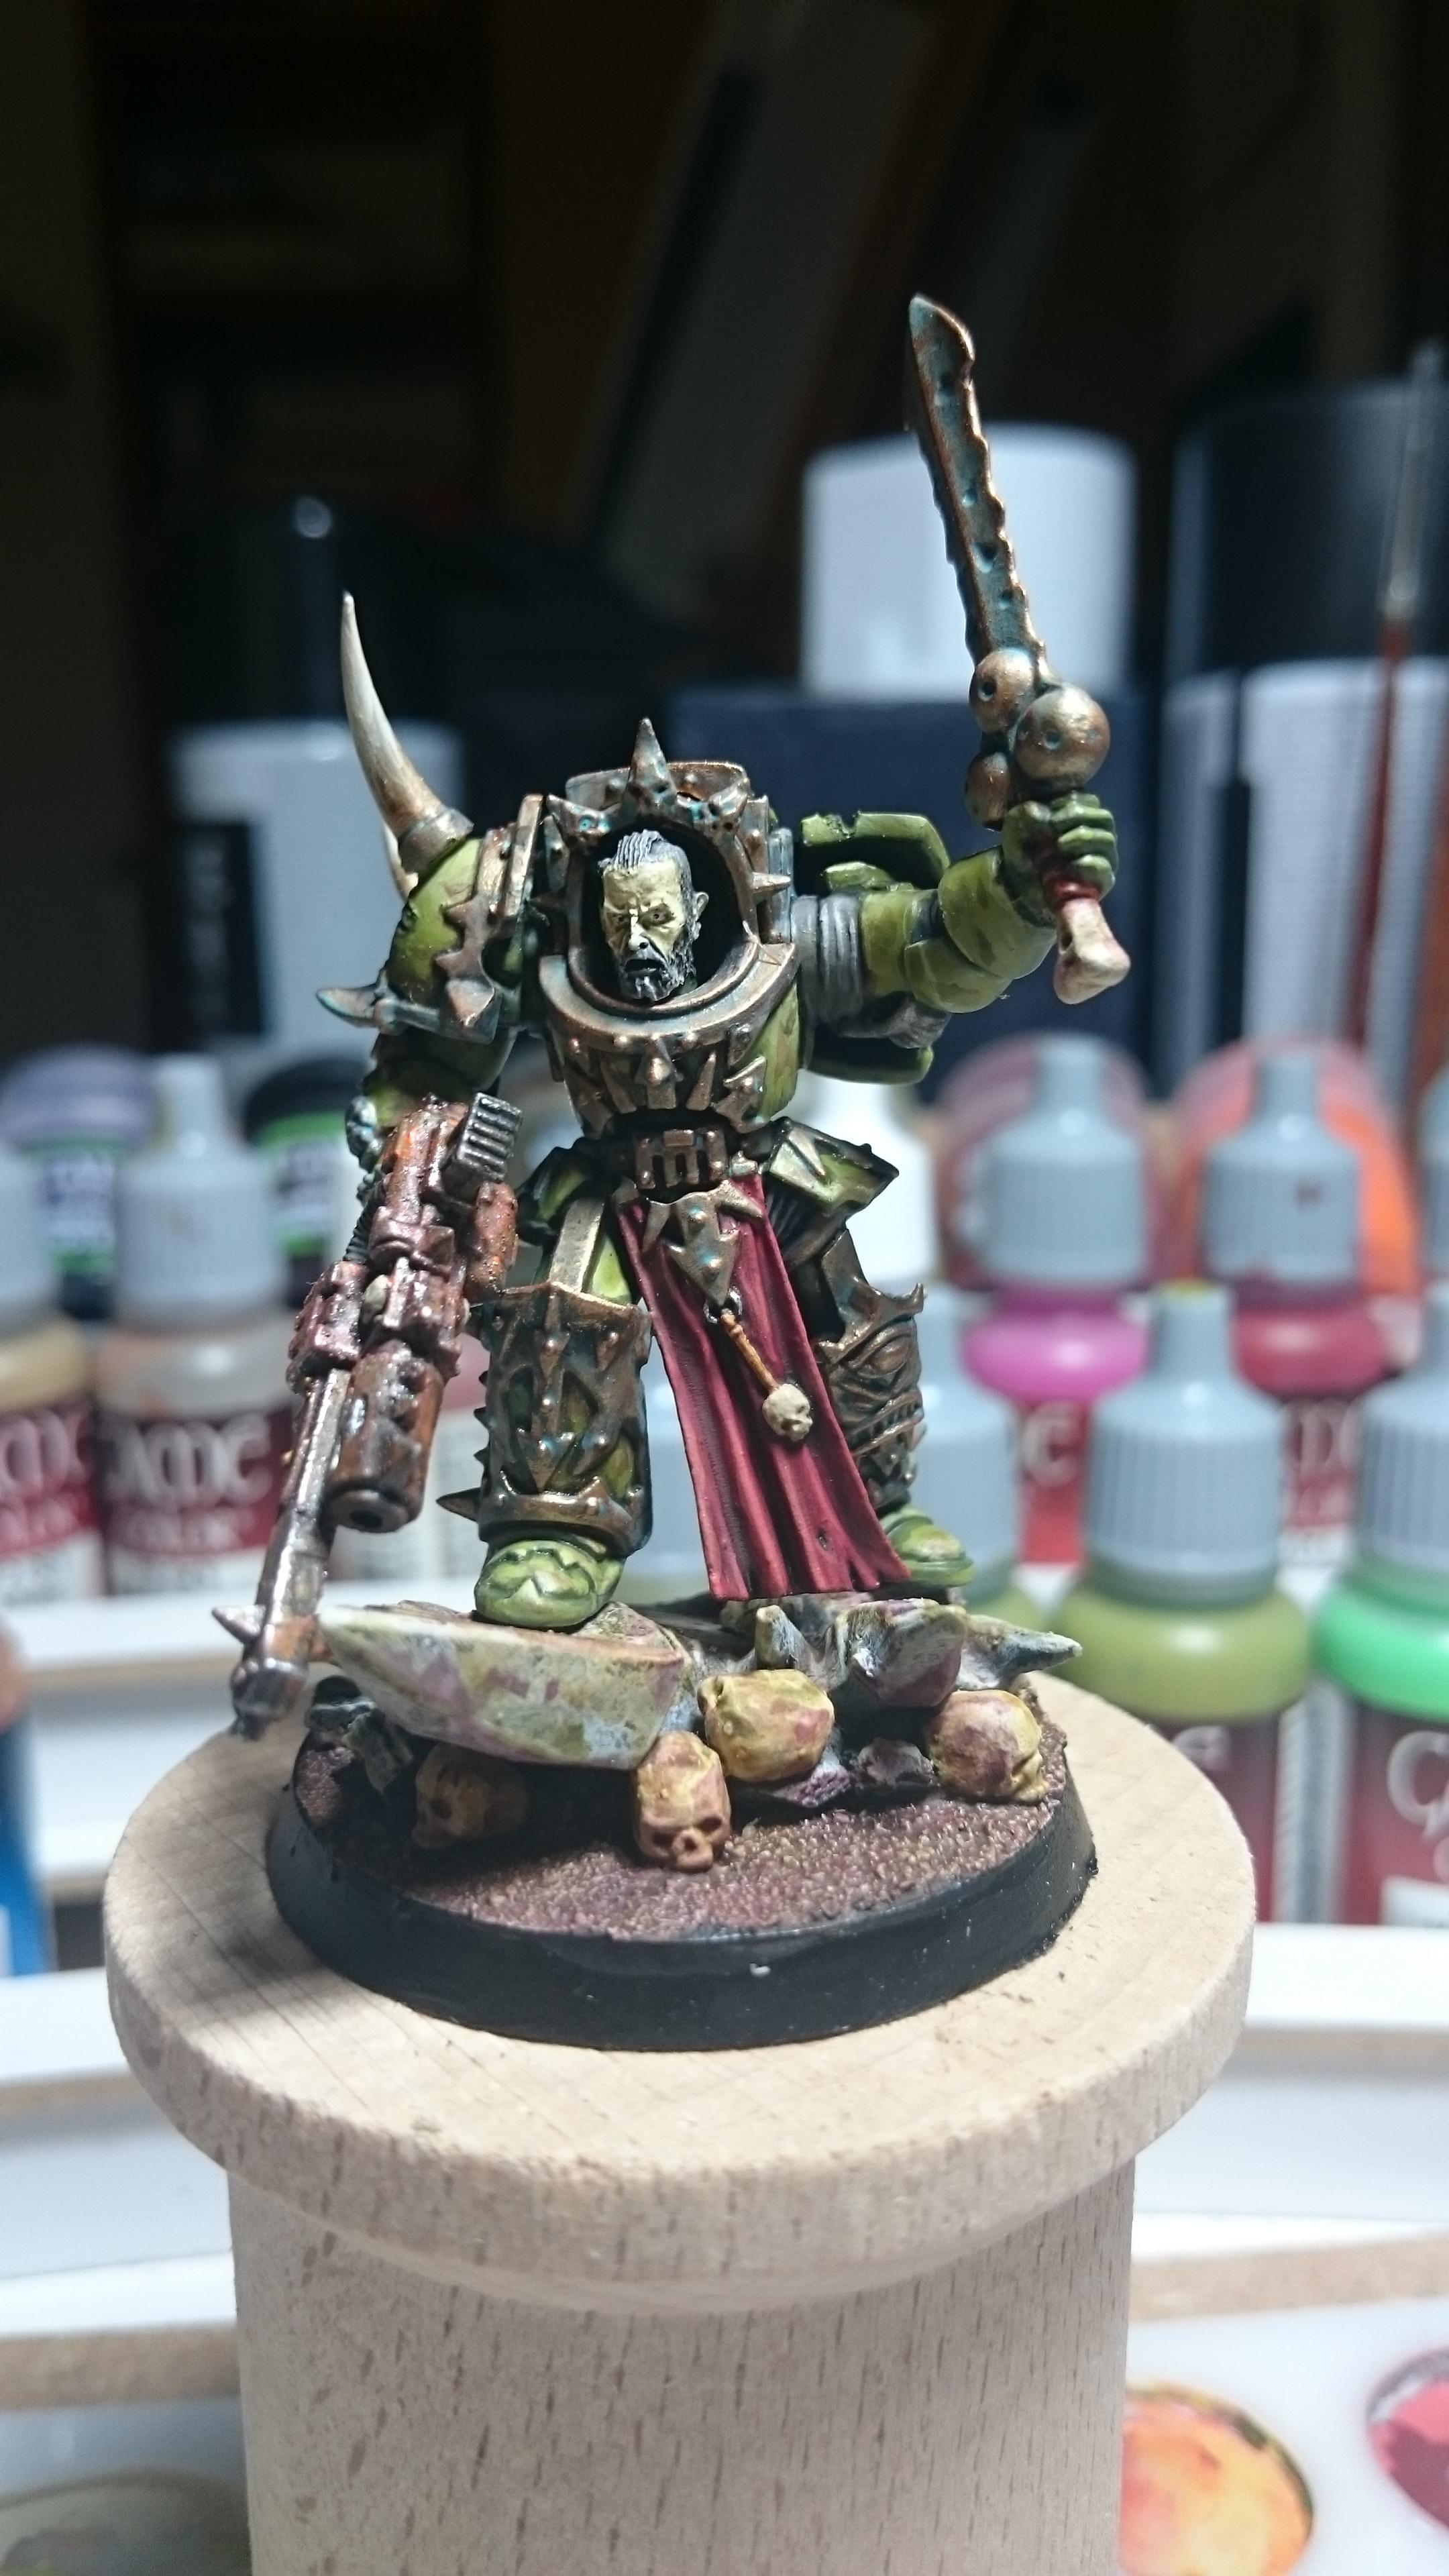 Chaos, Chaos Space Marines, Conversion, Daemons, Lord, Nurgle, Plague, Space, Space Marines, Terminator Armor, Warhammer 40,000, Warhammer Fantasy, Wh40